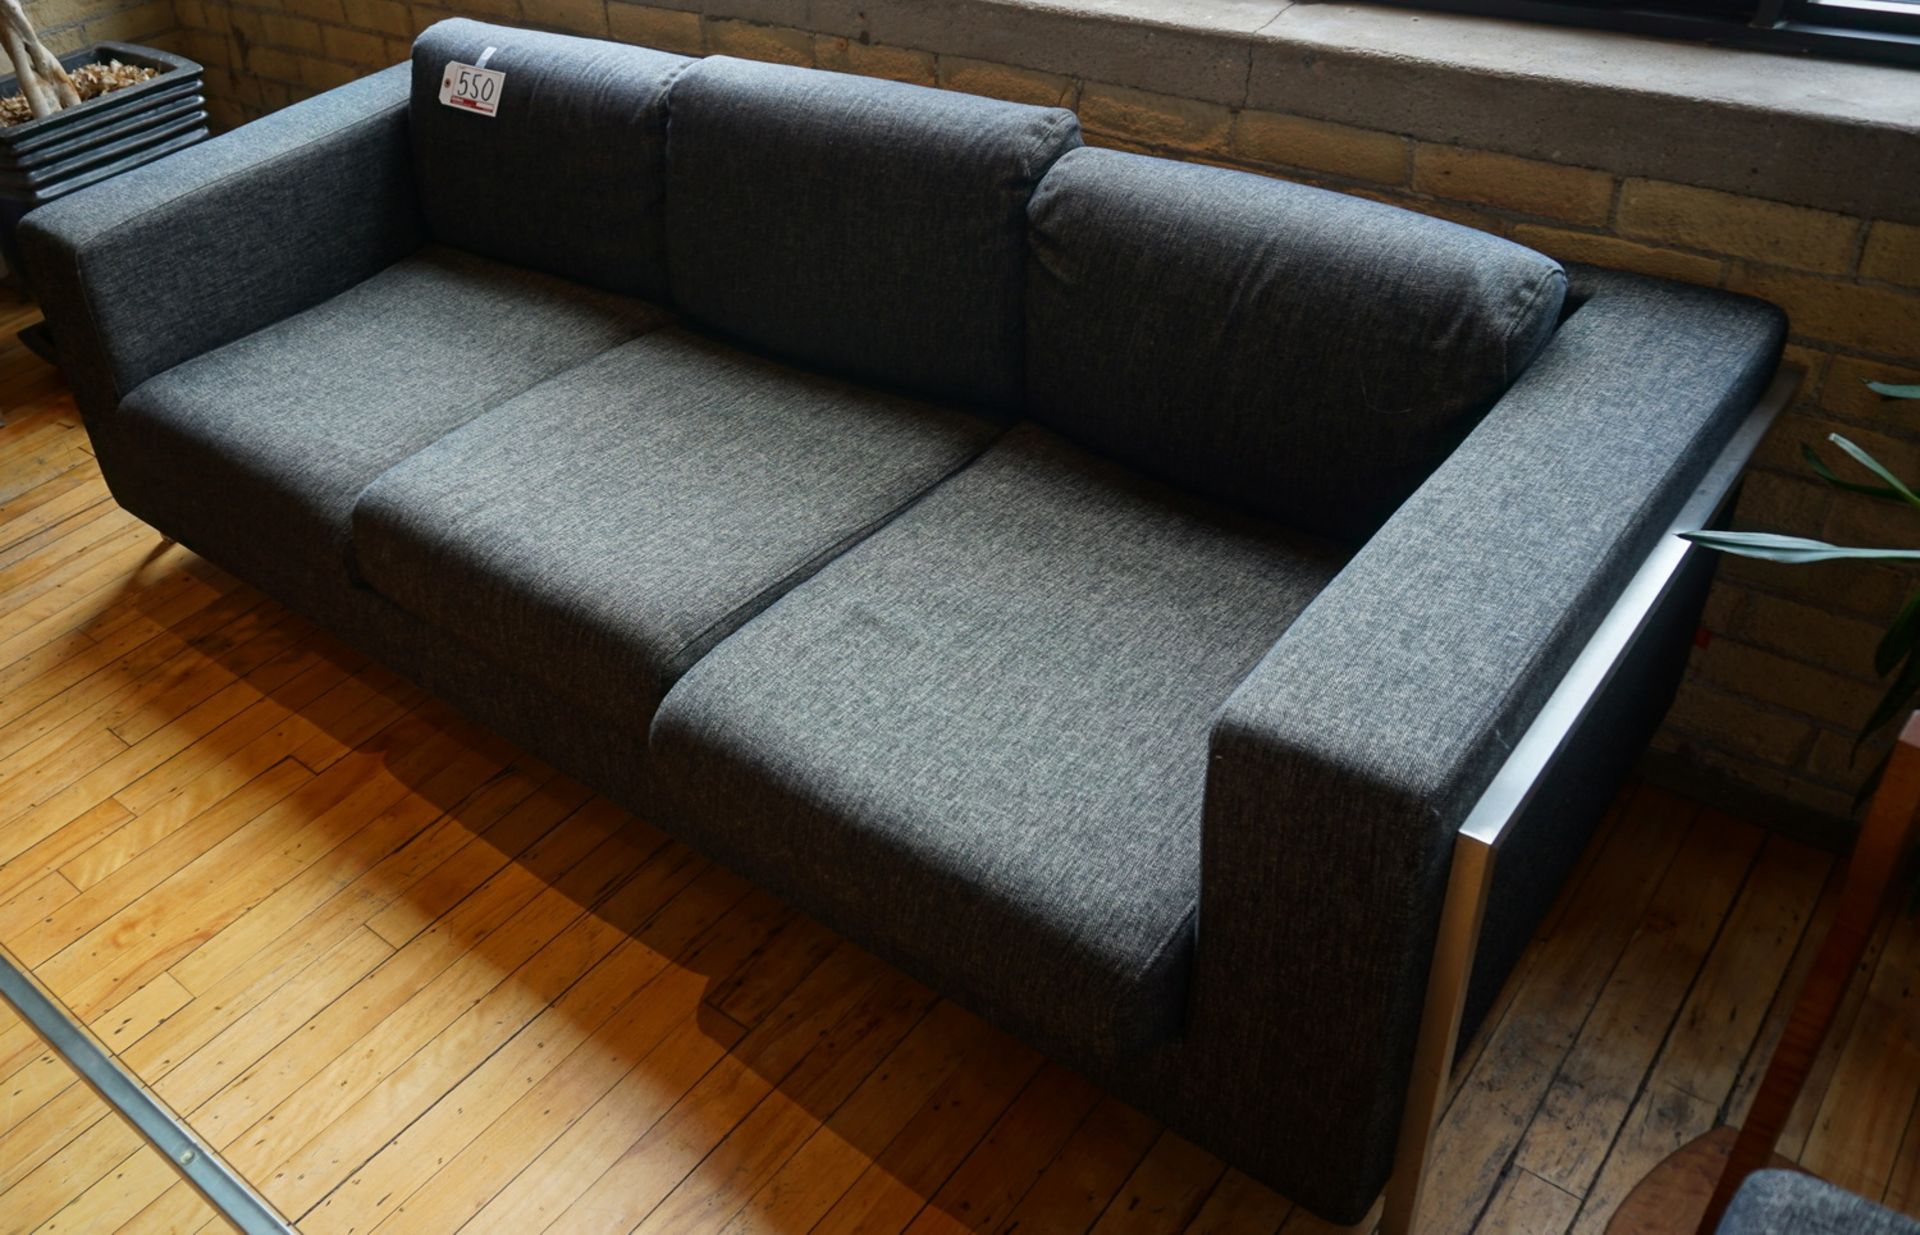 STYLE GARAGE 3-SEAT CHARCOAL GREY UPHOLSTERED SOFA (85"W X 36"D X 25"H) - Image 2 of 2